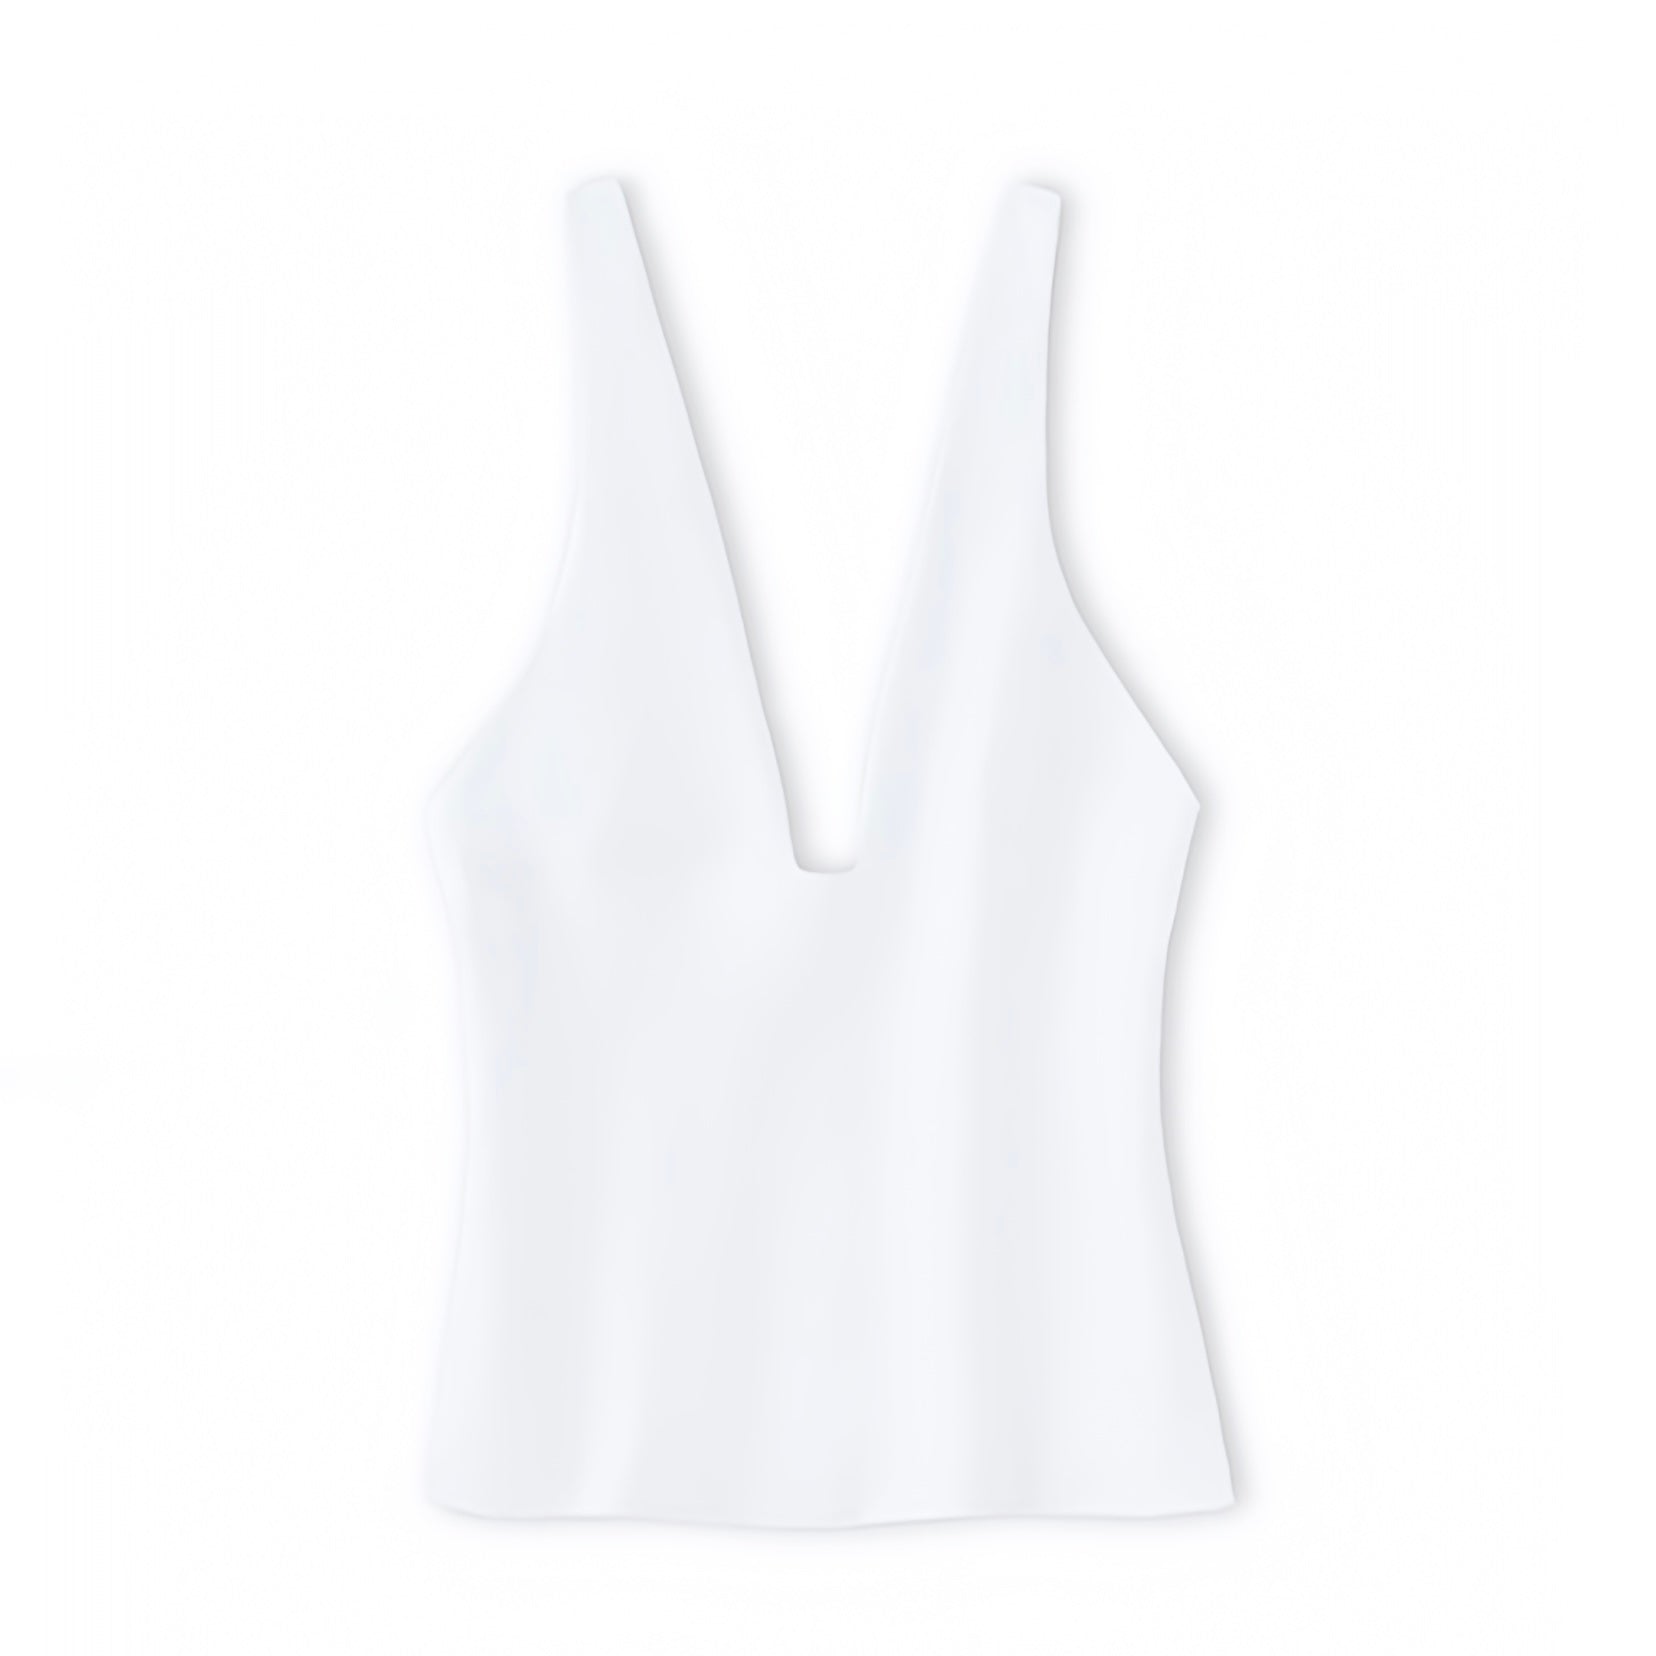 white-ivory-cream-slim-fit-bodycon-corset-bustier-deep-v-neck-sleeveless-short-sleeve-spaghetti-strap-backless-open-back-cut-out-camisole-crop-vest-tank-top-blouse-women-ladies-chic-trendy-spring-2024-summer-elegant-casual-semi-formal-classy-feminine-party-date-night-out-sexy-club-wear-y2k-90s-minimalist-office-siren-style-zara-revolve-aritzia-whitefox-princess-polly-babyboo-iamgia-edikted-fenity-areyouami